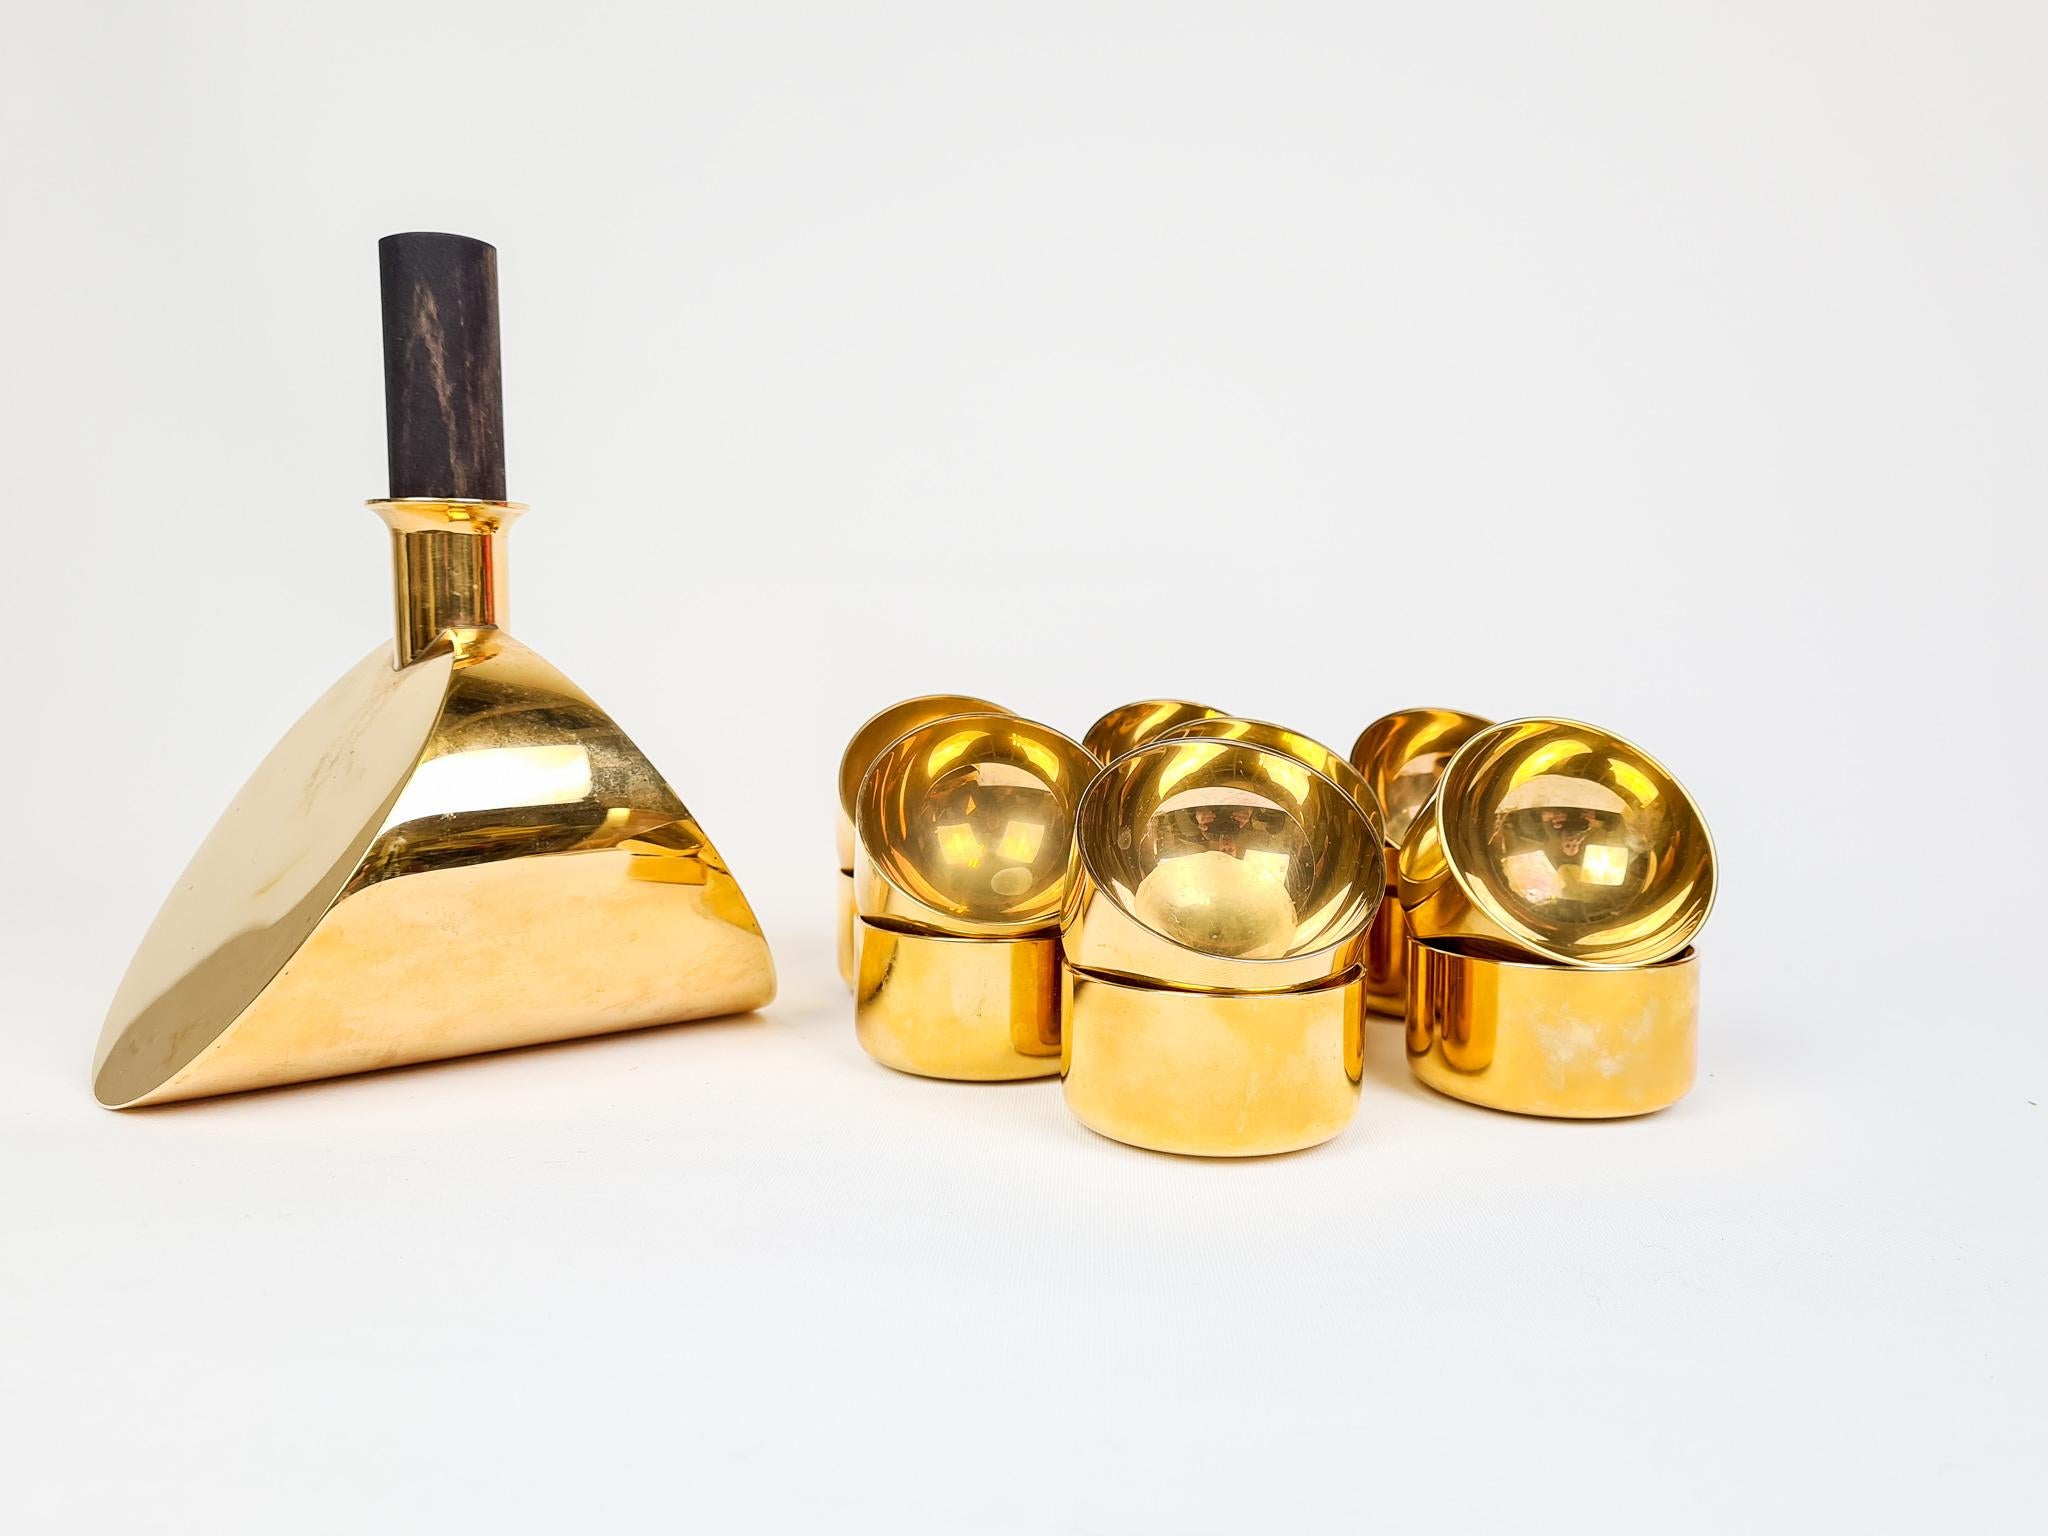 Wonderful, sculptured brass Decanter and bowls made from solid brass. These ones were manufactured in Sweden at Skultuna and Designed by Pierre Forssell. There are one decanter and 14 small bowls suited for shots or just as decorative